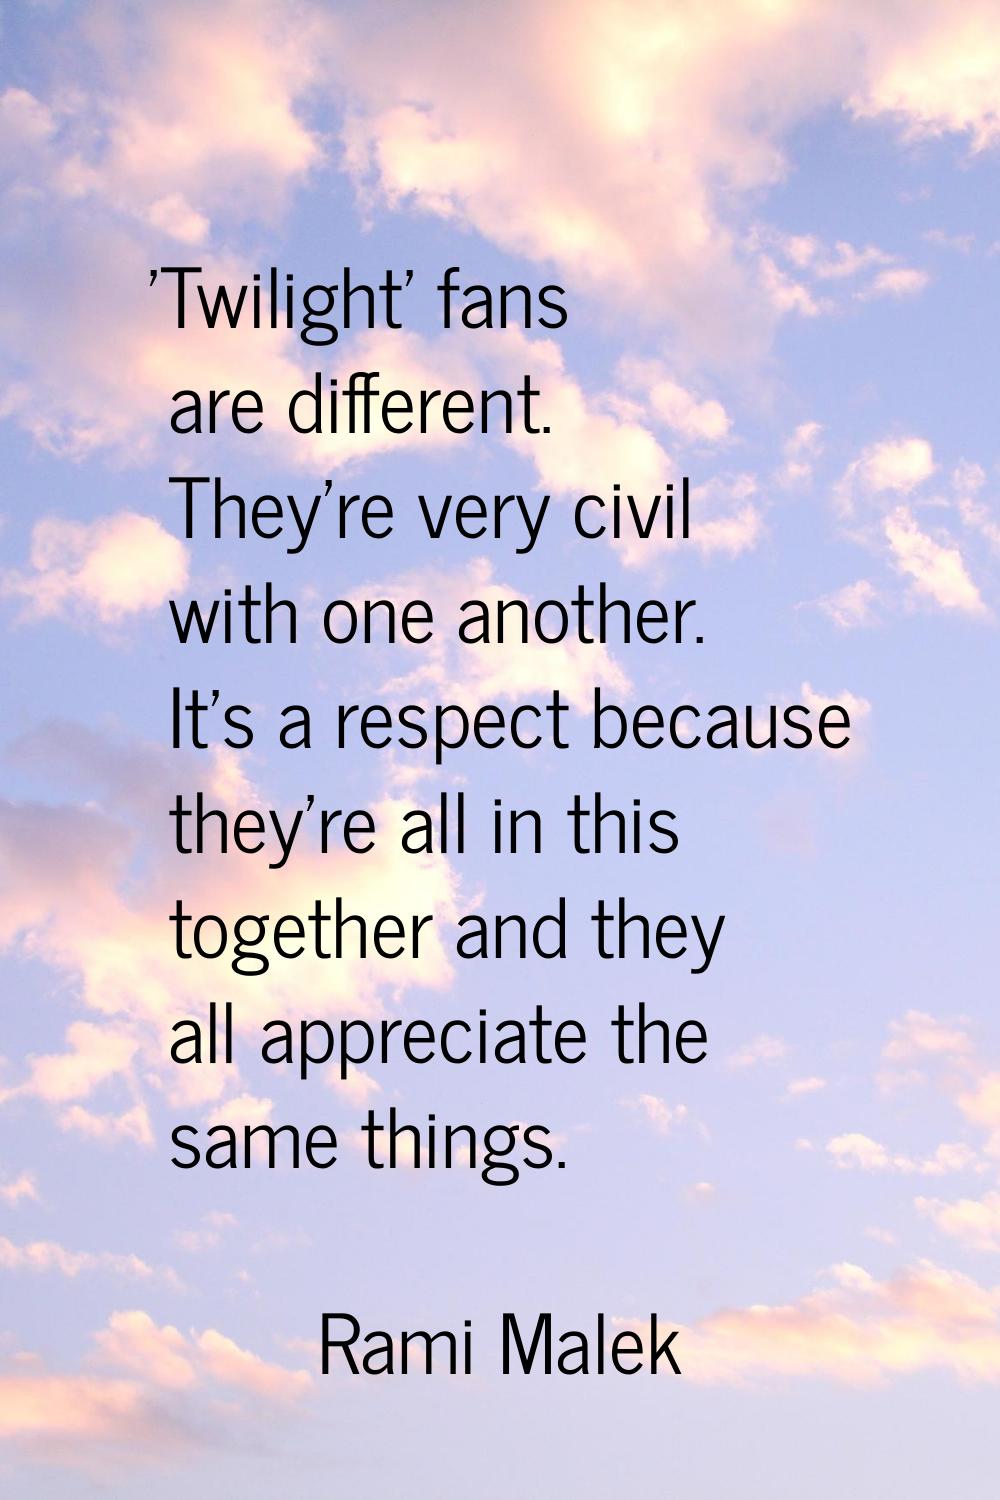 'Twilight' fans are different. They're very civil with one another. It's a respect because they're 